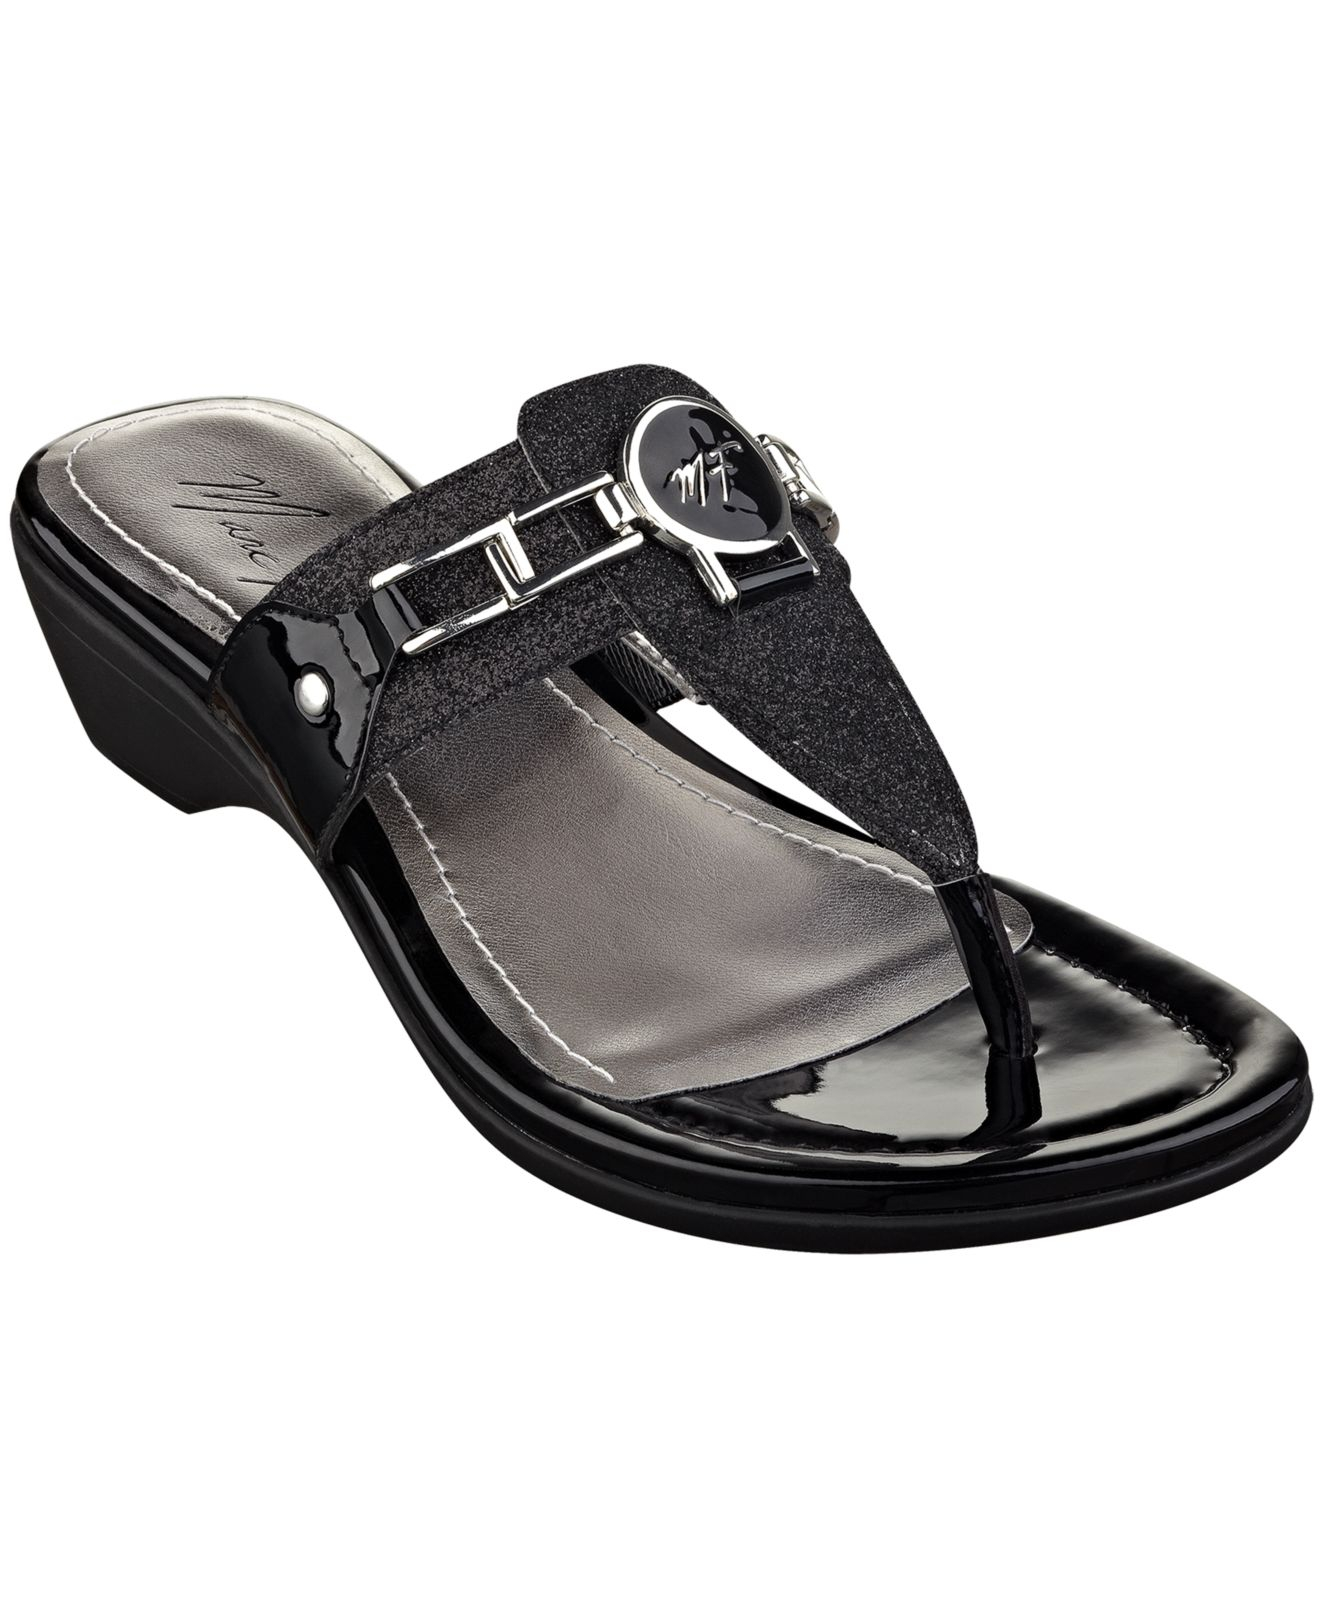 Marc fisher Amina Thong Sandals in Black Lyst